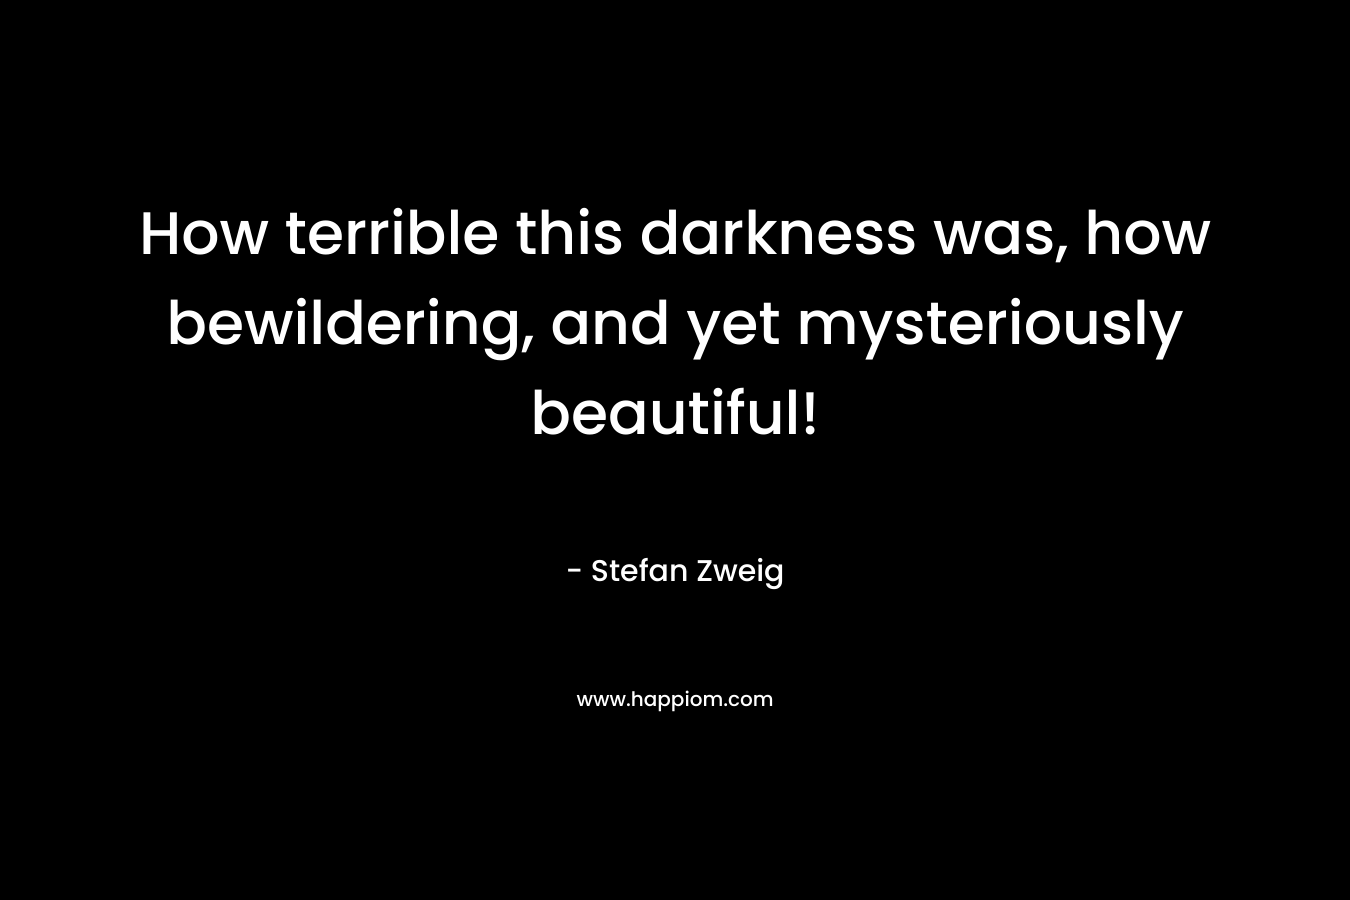 How terrible this darkness was, how bewildering, and yet mysteriously beautiful! – Stefan Zweig